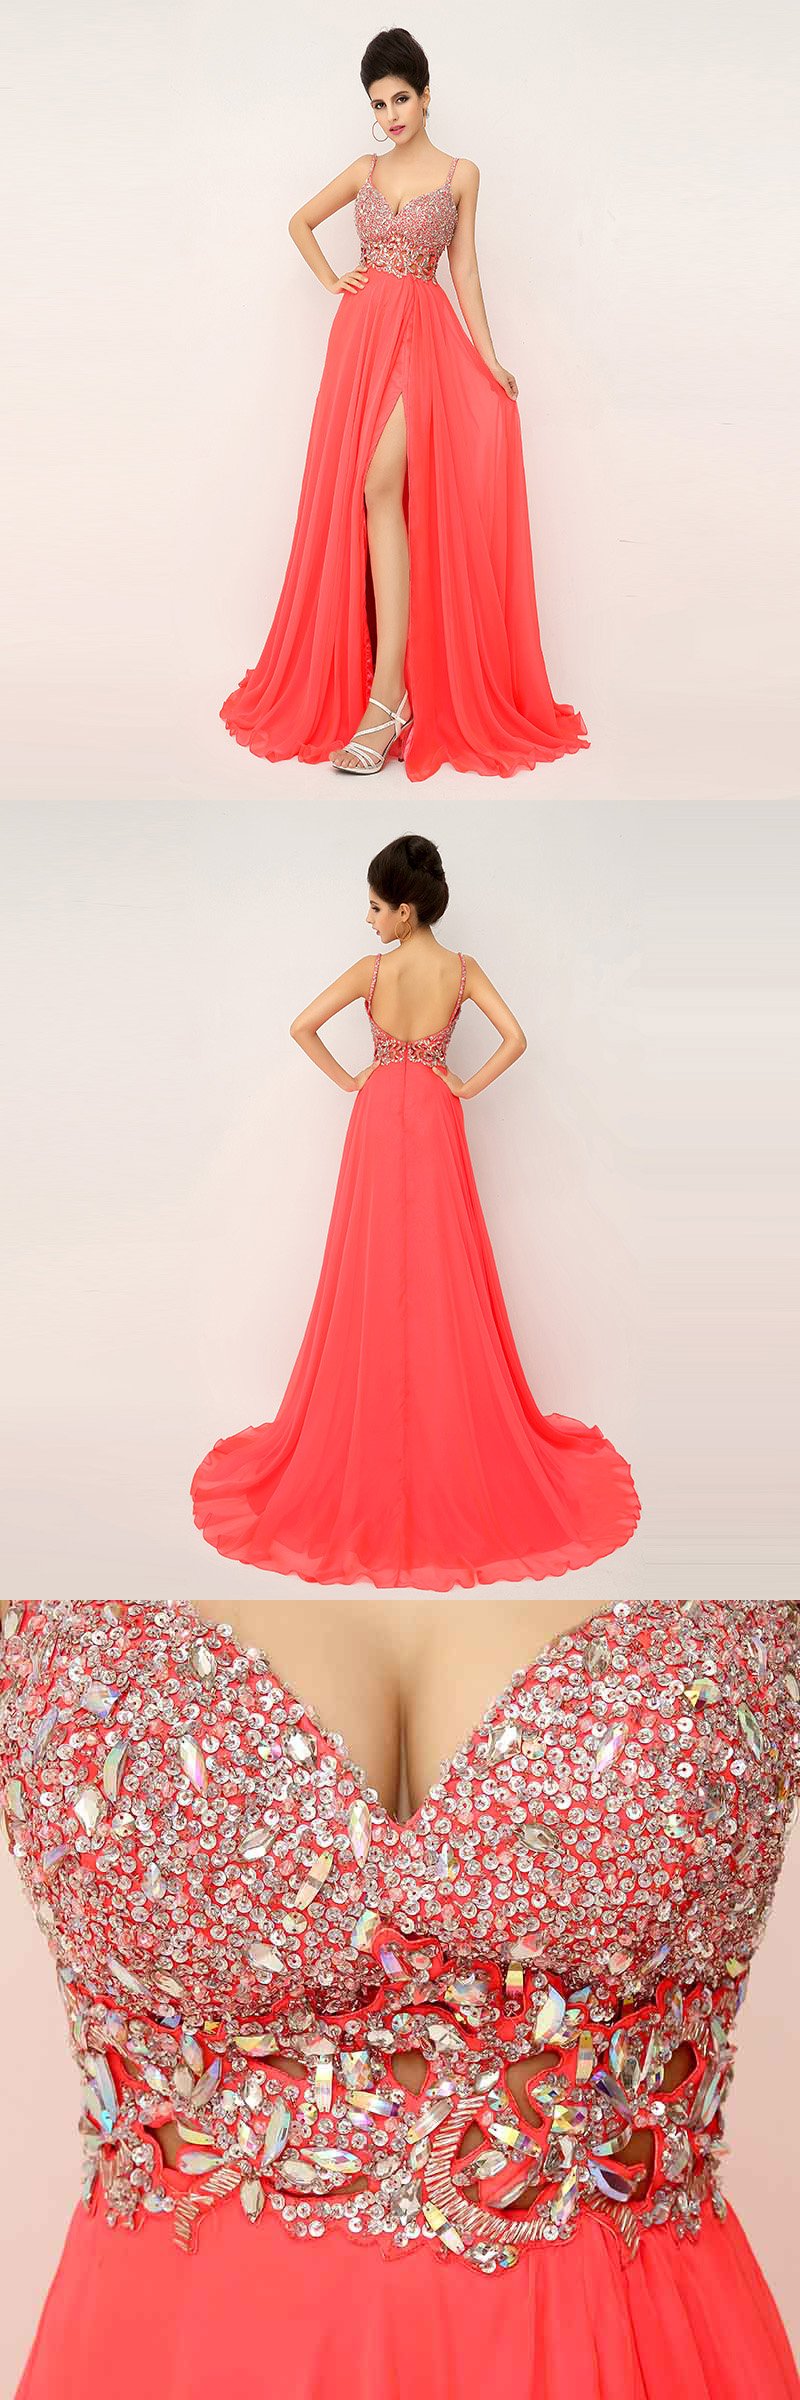 Sexy Beaded Long Prom Dresses Backless Spaghetti Straps Evening Dresses A-Line Formal Dresses